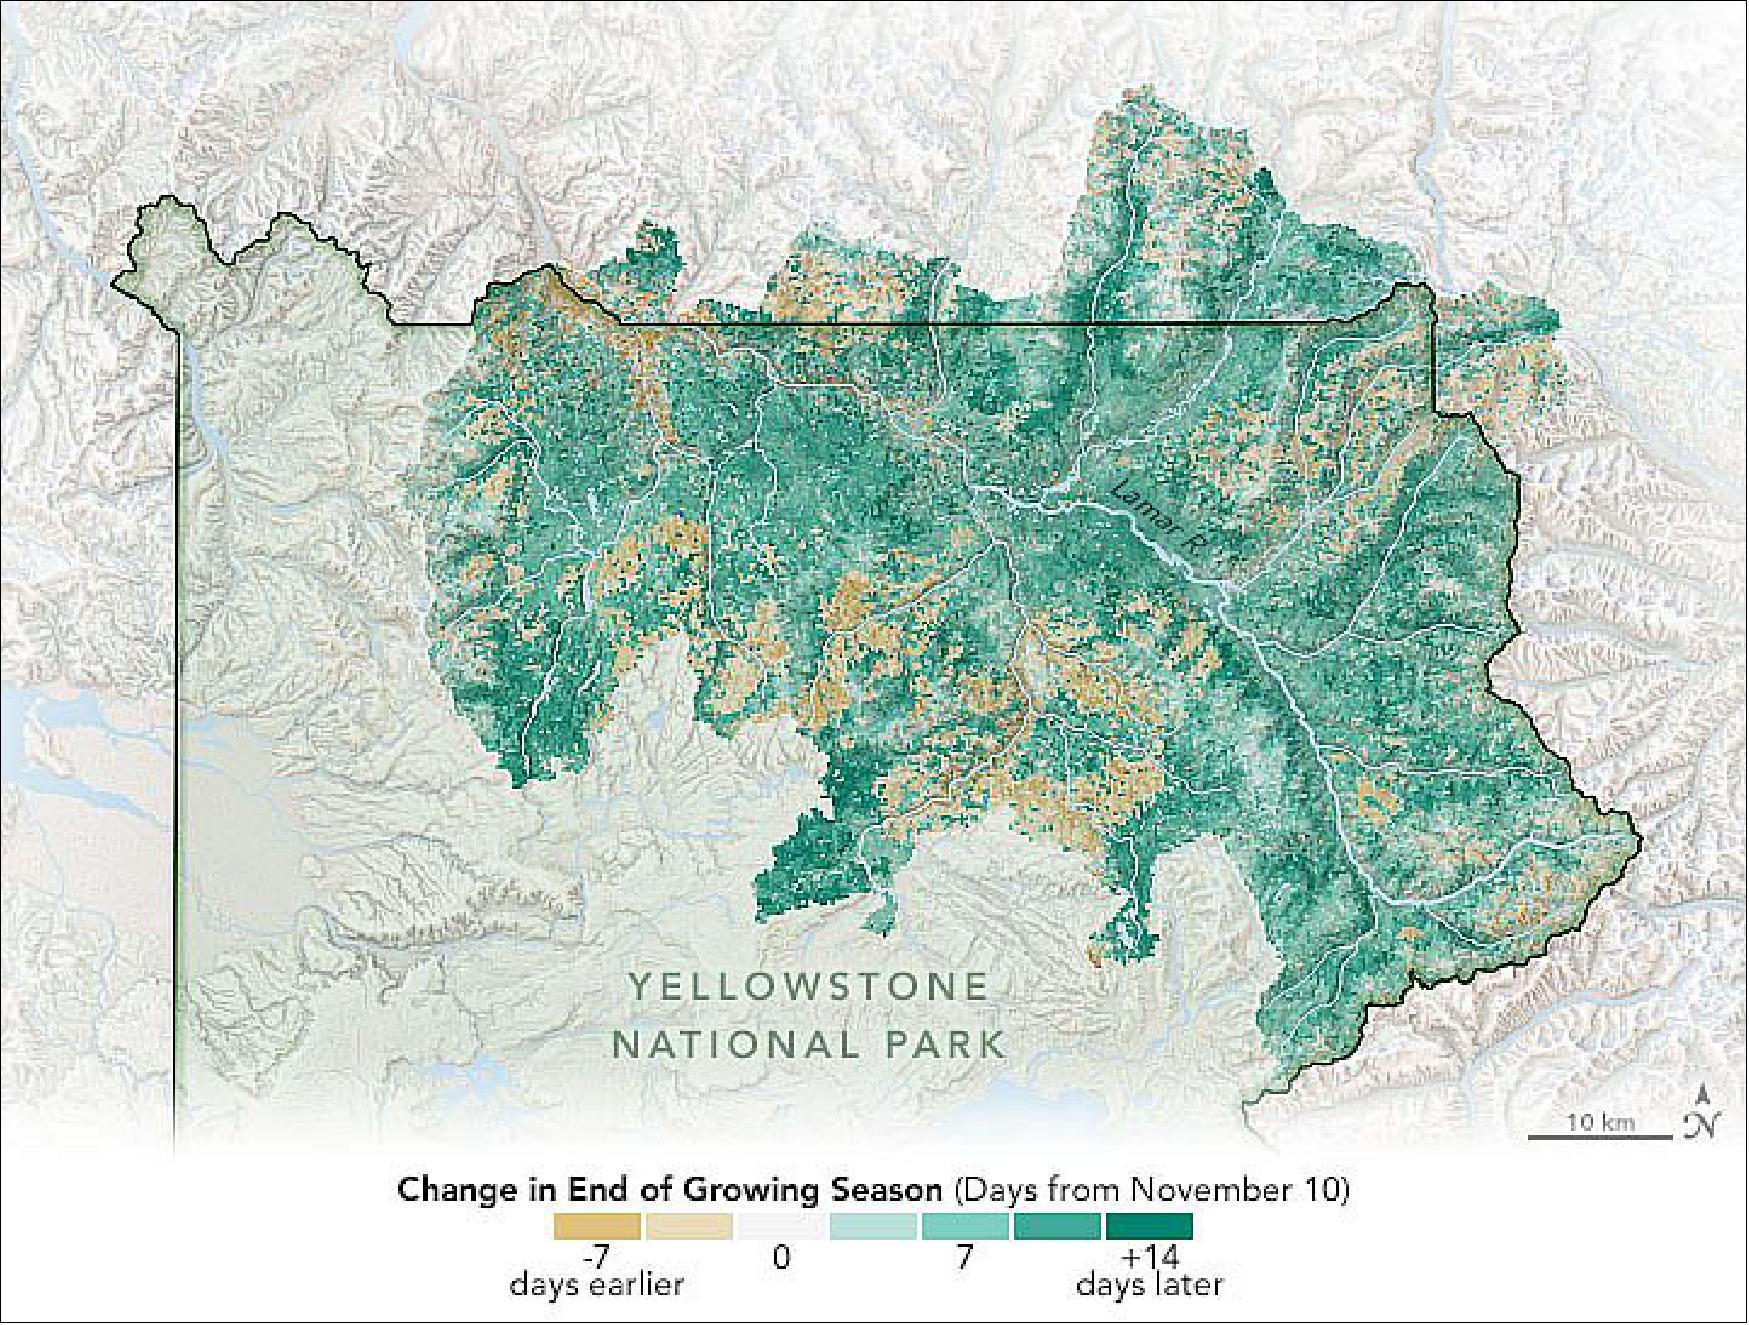 Figure 88: A new study has found a link between the effects of climate change, the productivity of grasslands, and the proliferation of bison in Yellowstone National Park. The map depicts one aspect of that change: how the end of the growing season fluctuated around Yellowstone National Park between 2001 and 2017. The map is based on measurements of vegetation greenness, the NDVI (Normalized Difference Vegetation Index), as observed by the Moderate Resolution Imaging Spectroradiometer (MODIS) instruments on Aqua and Terra (image credit: NASA Earth Observatory image by Joshua Stevens, using data from Potter, C. (2020). Story by Abby Tabor, NASA Ames Research Center, and Mike Carlowicz)